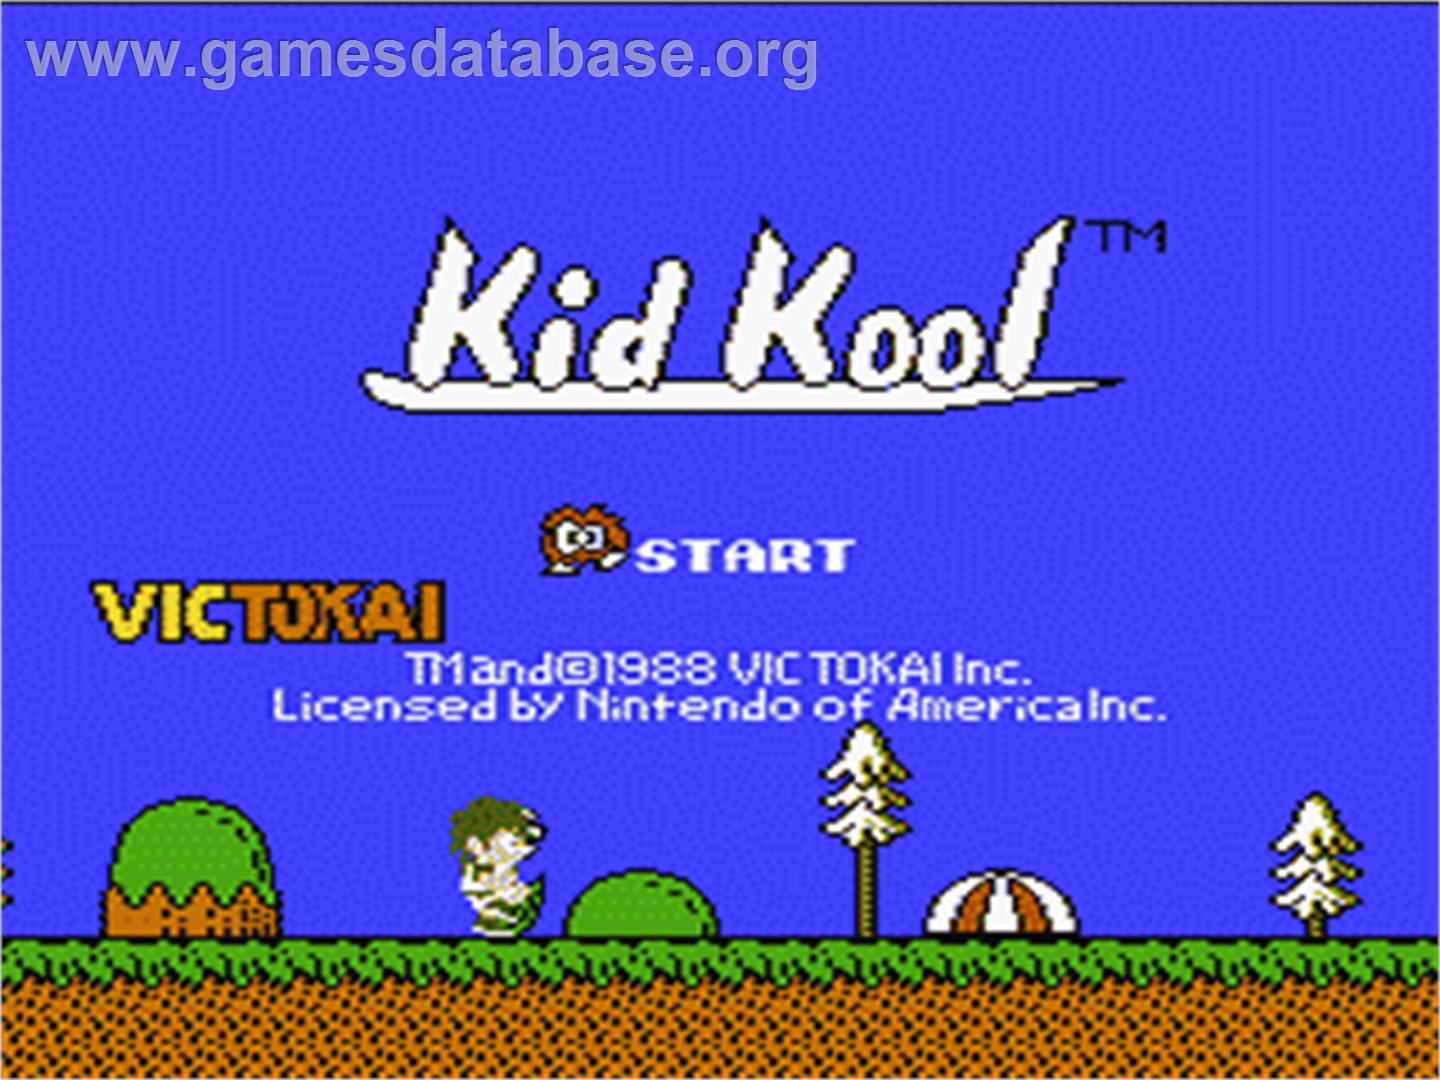 Kid Kool and the Quest for the Seven Wonder Herbs - Nintendo NES - Artwork - Title Screen